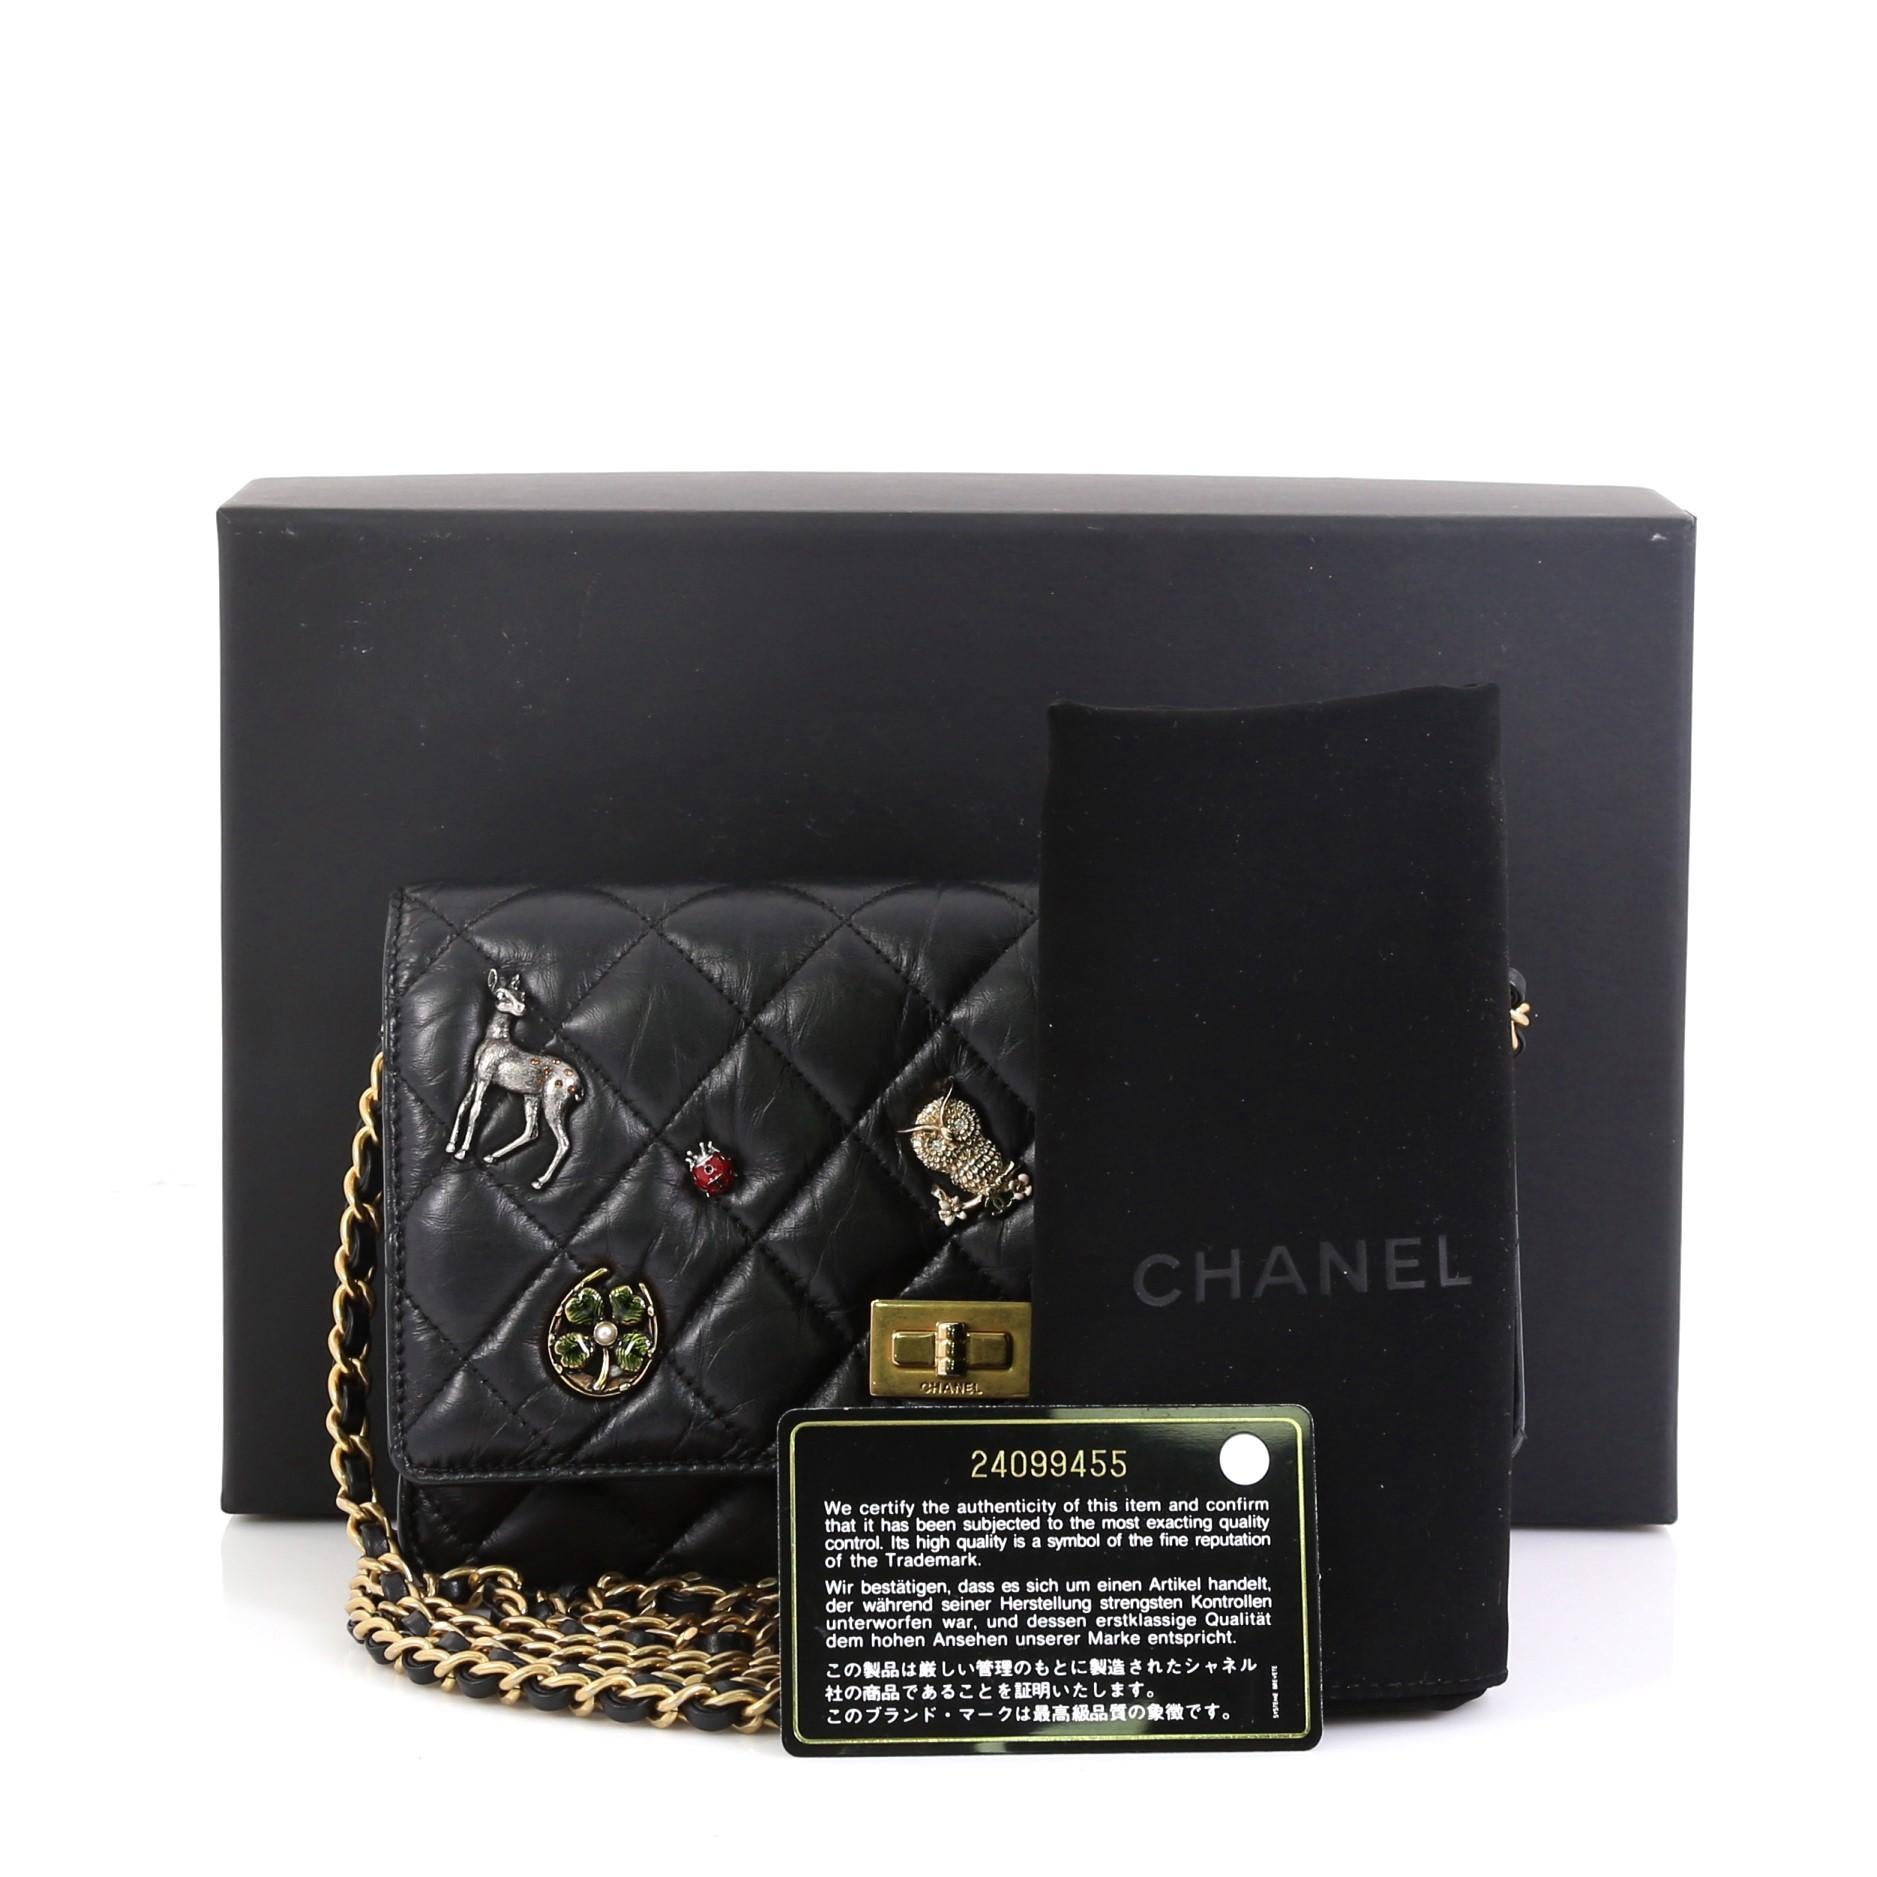 This Chanel Lucky Charms Reissue Wallet on Chain Quilted Calfskin, crafted in black diamond quilted calfskin leather, features Chanel's lucky charm symbols, woven in leather chain link strap, mademoiselle decorative clasp on the front flap, exterior